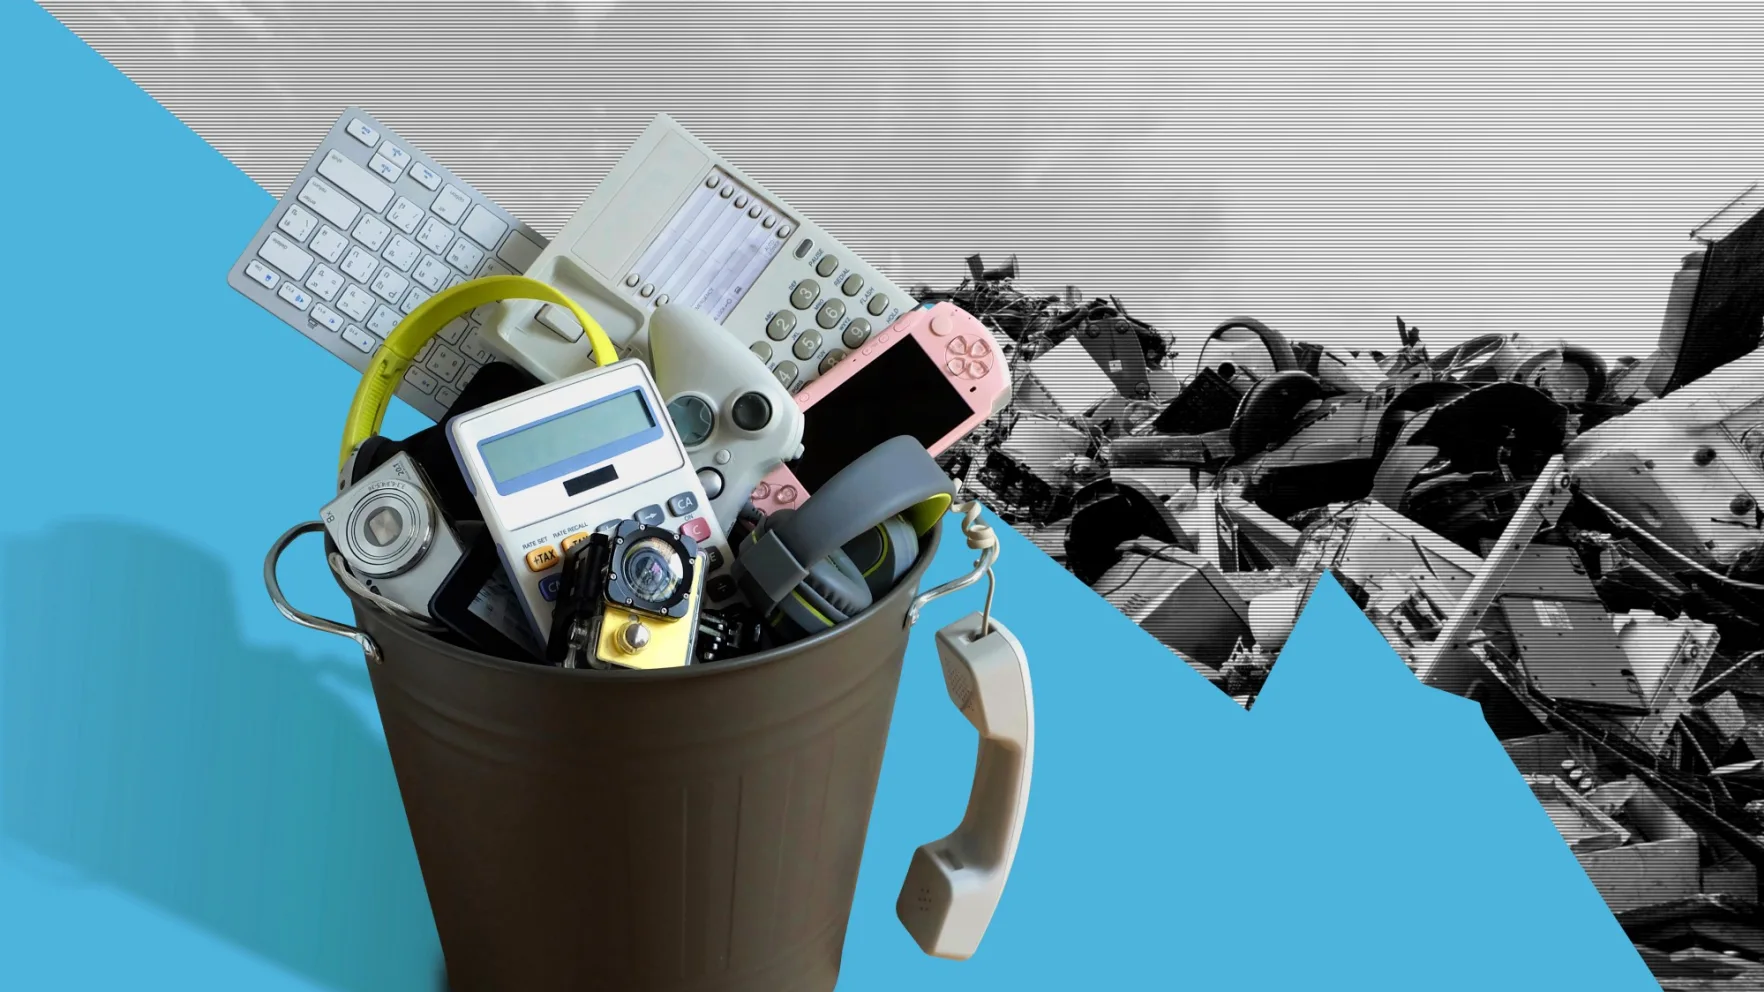 5 ways to reduce your e-waste